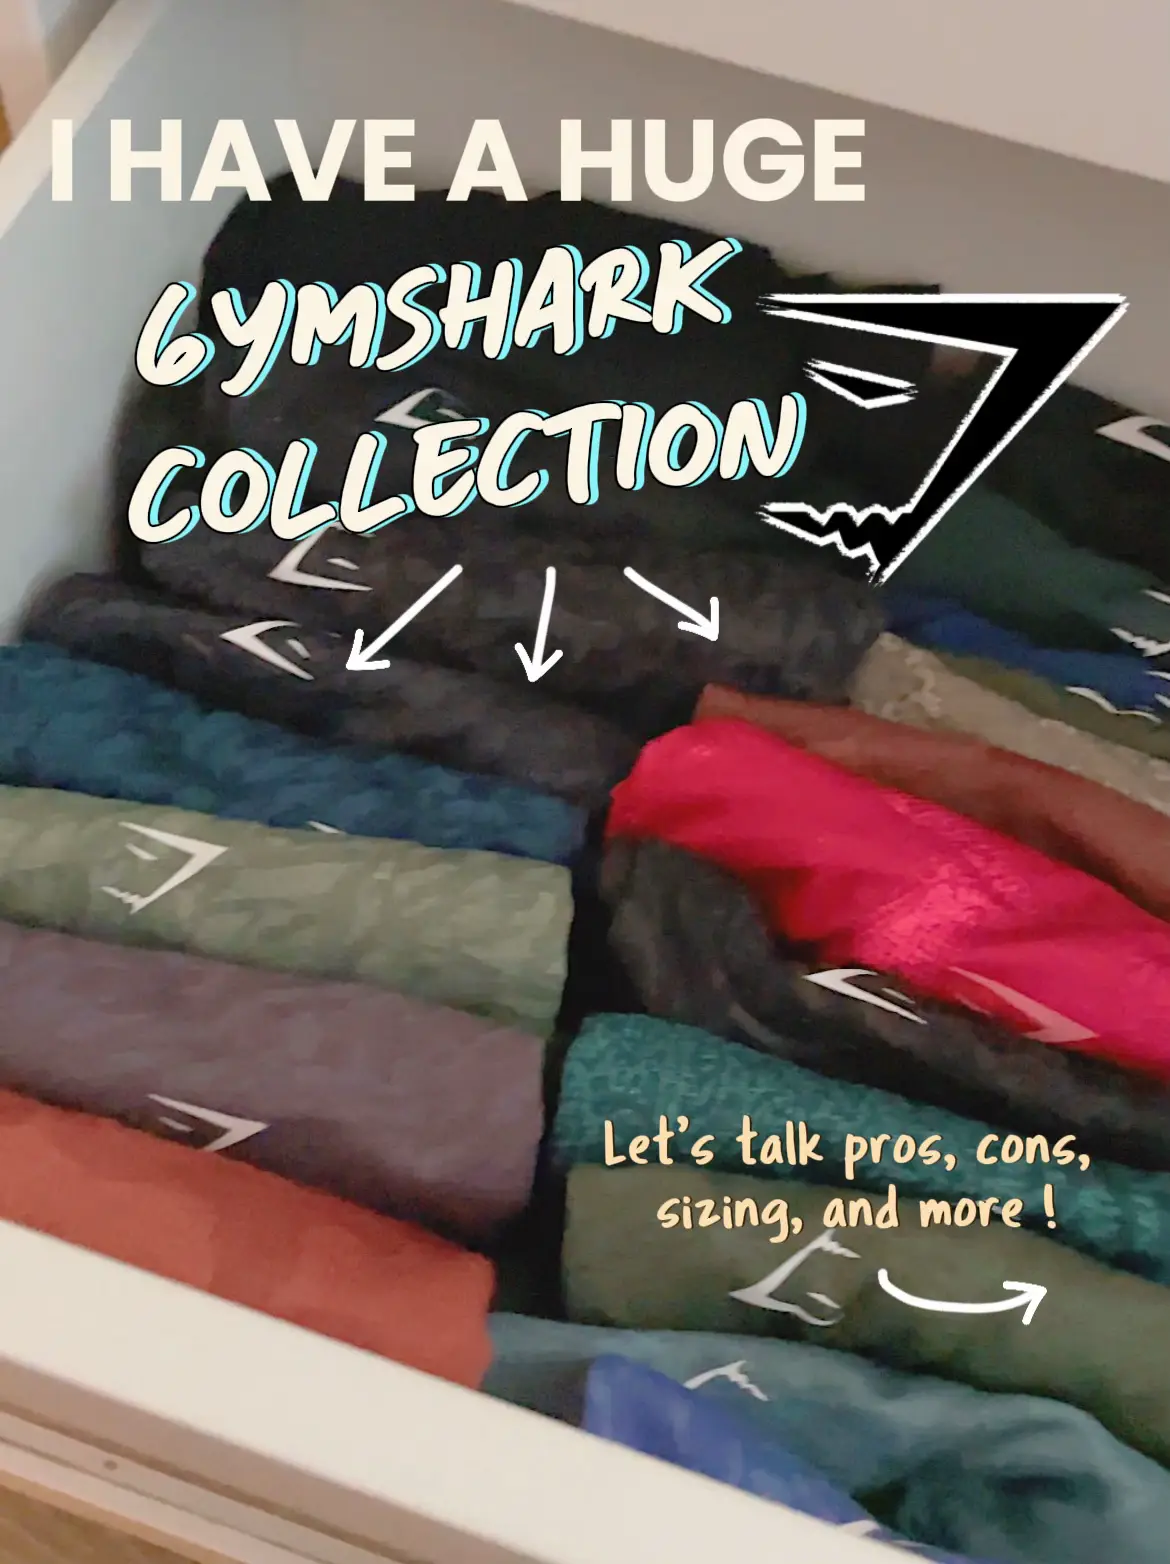 NEW GYMSHARK STUDIO & PAUSE TRY ON HAUL REVIEW + GYMSHARK GIVEAWAY